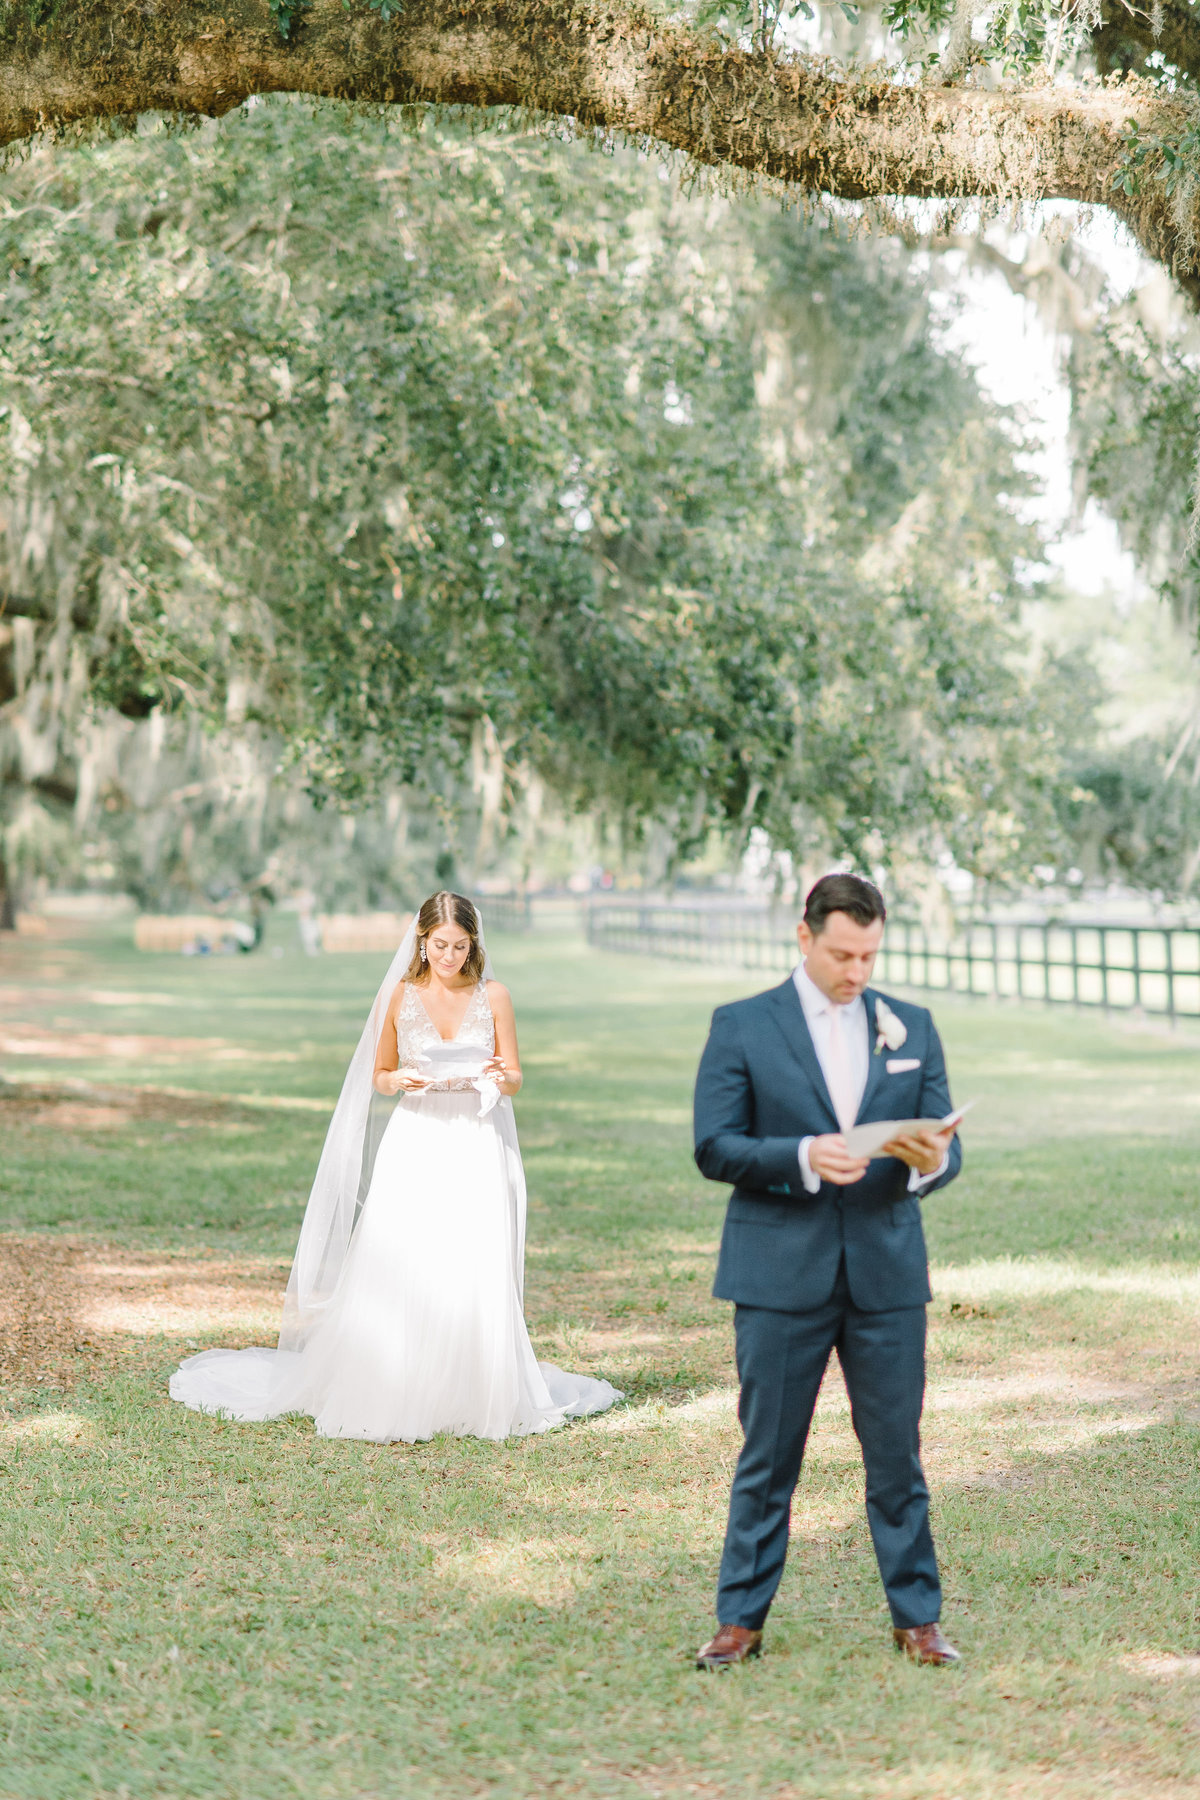 Boone Hall Plantation Bride and Groom Exchanging Notes before First Look